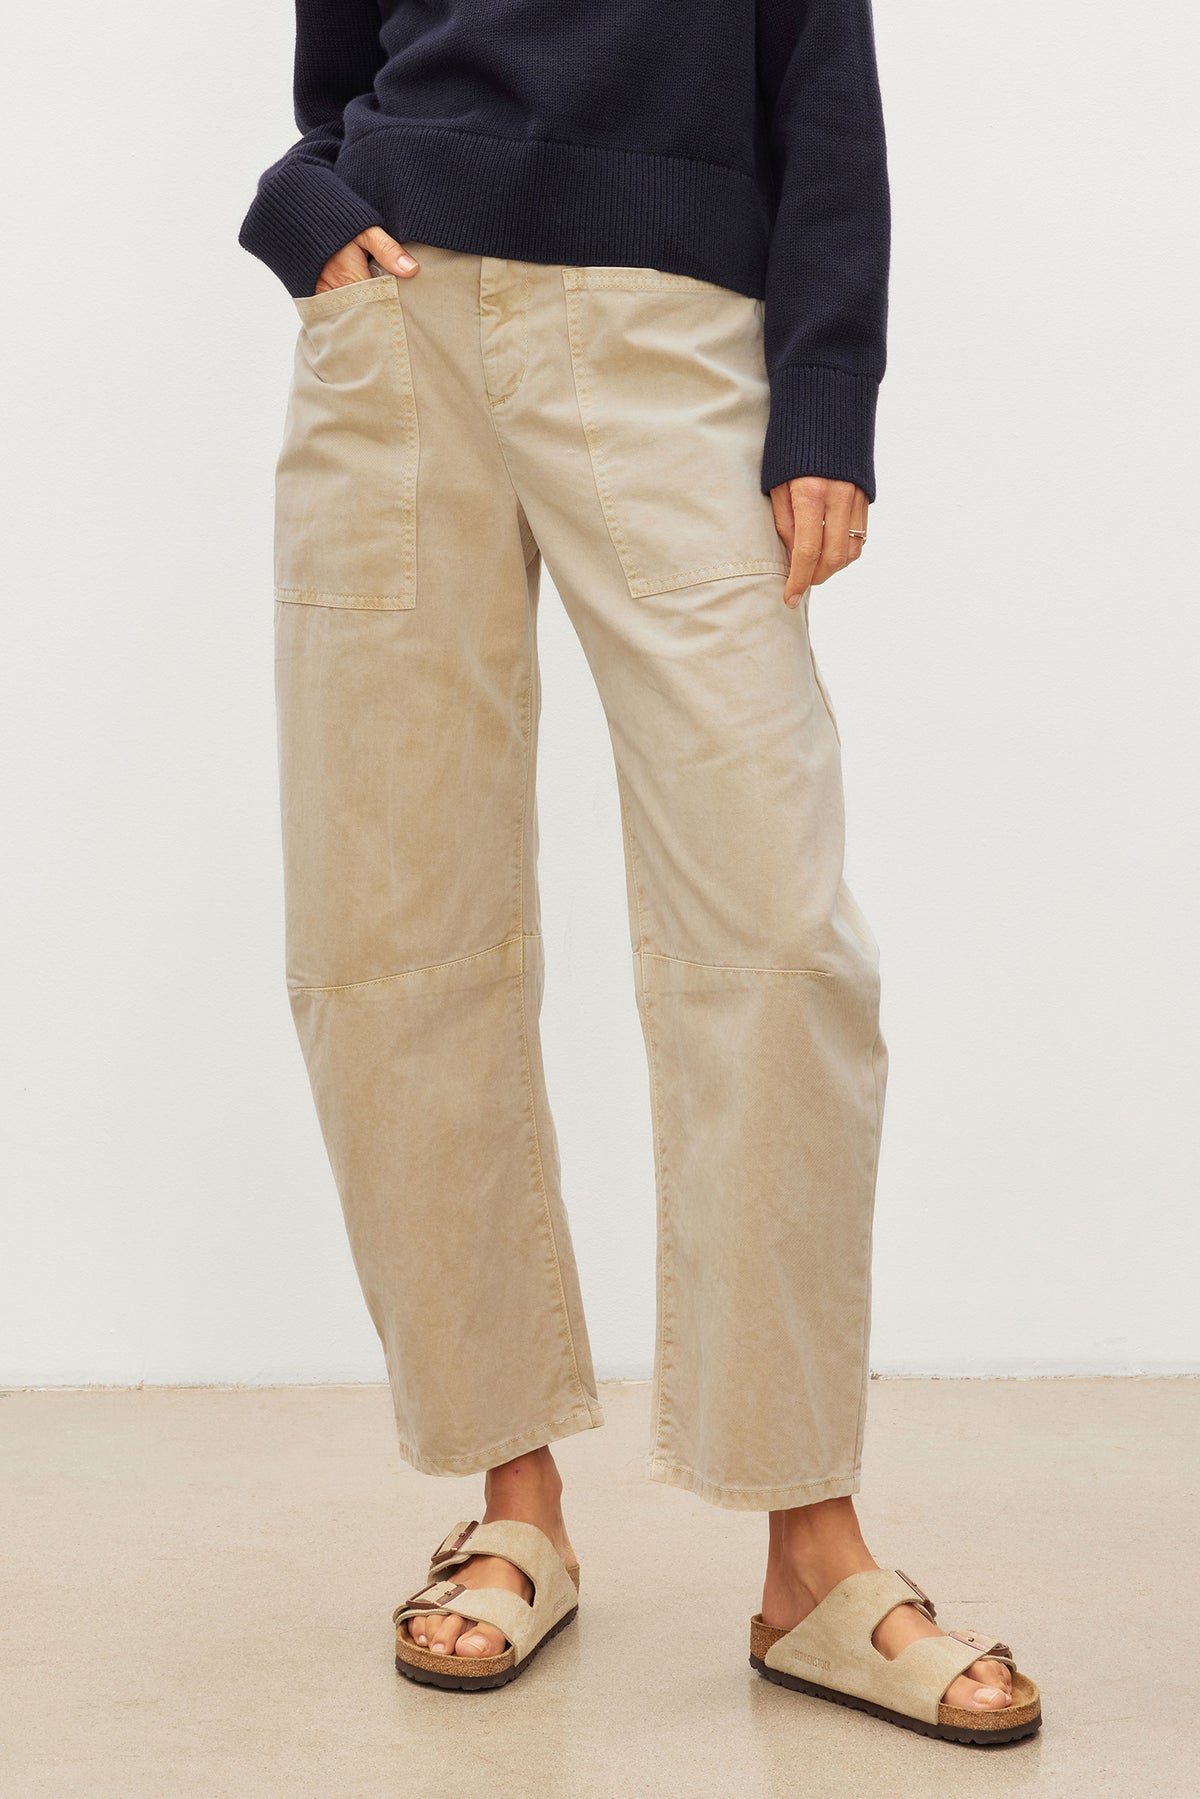   The model is wearing beige BRYLIE SANDED TWILL UTILITY PANT made by Velvet by Graham & Spencer. 